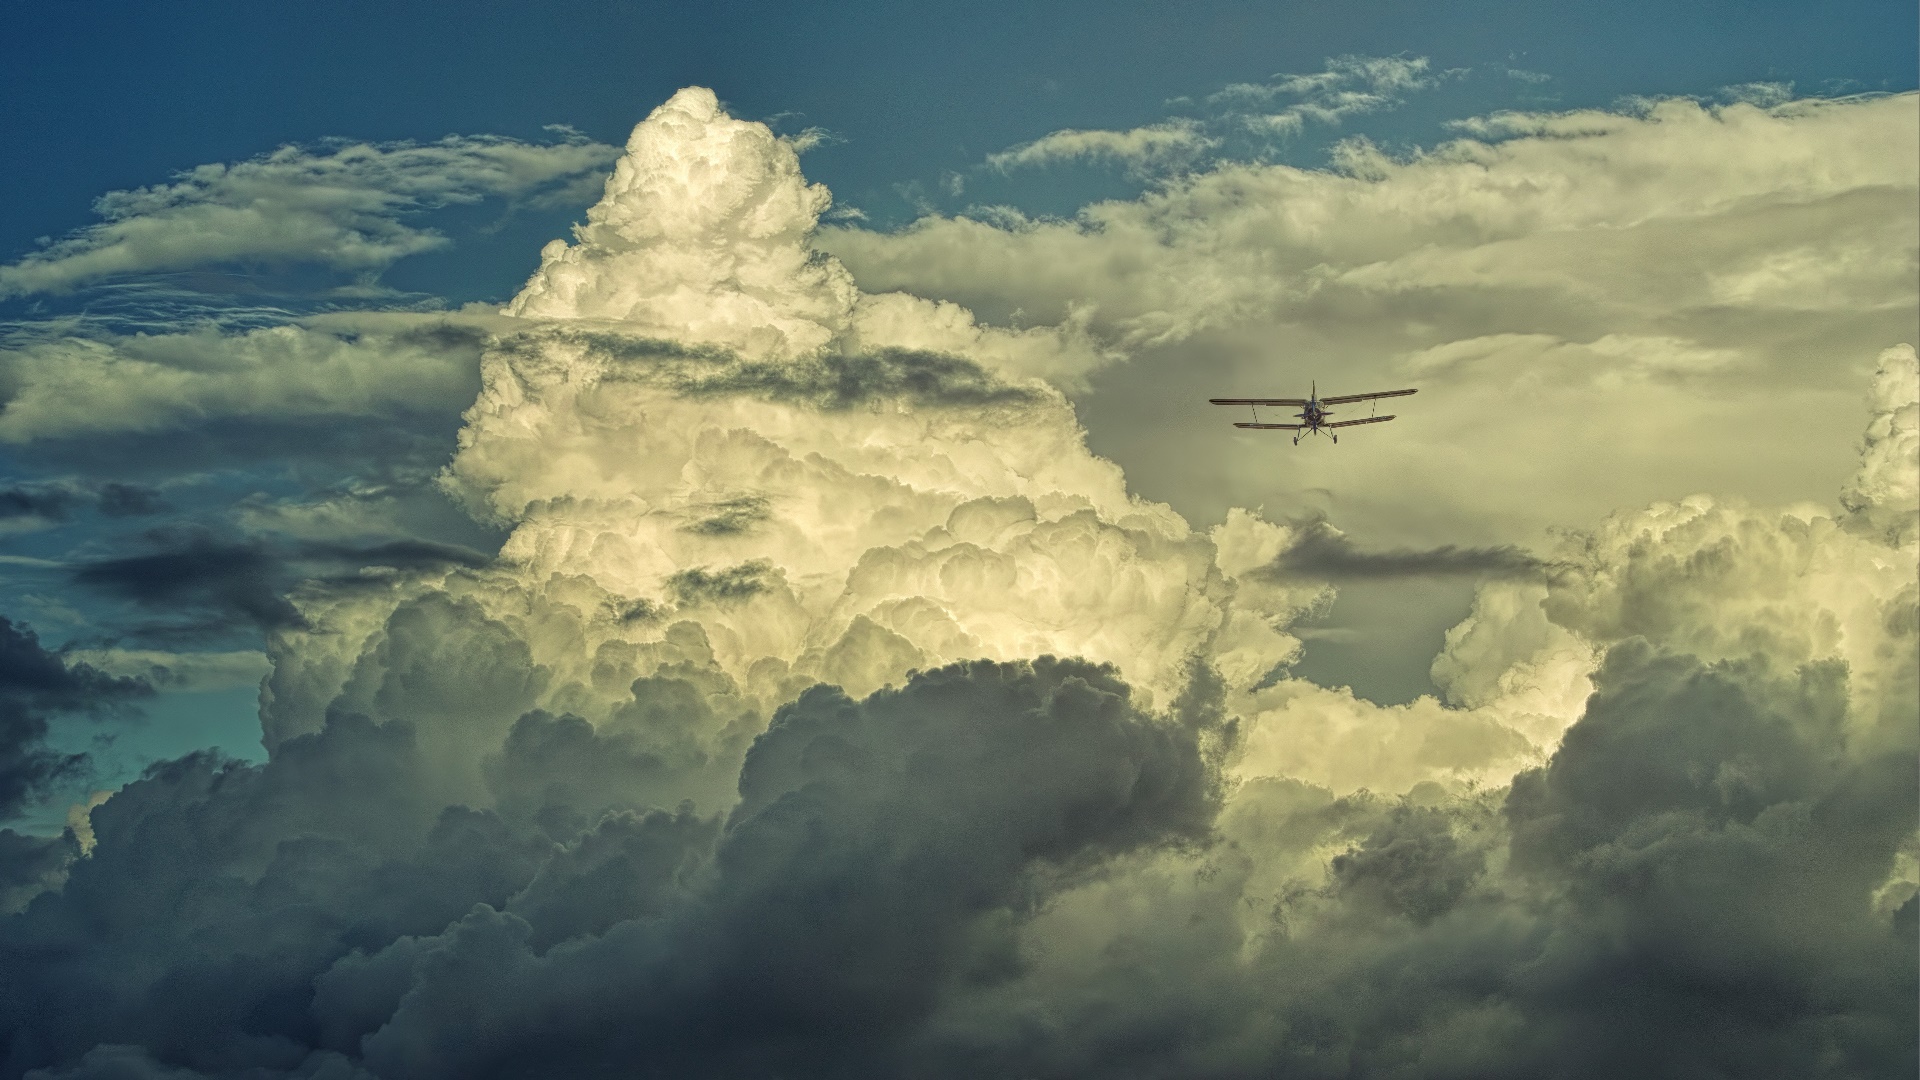 General 1920x1080 sky clouds nature vehicle aircraft